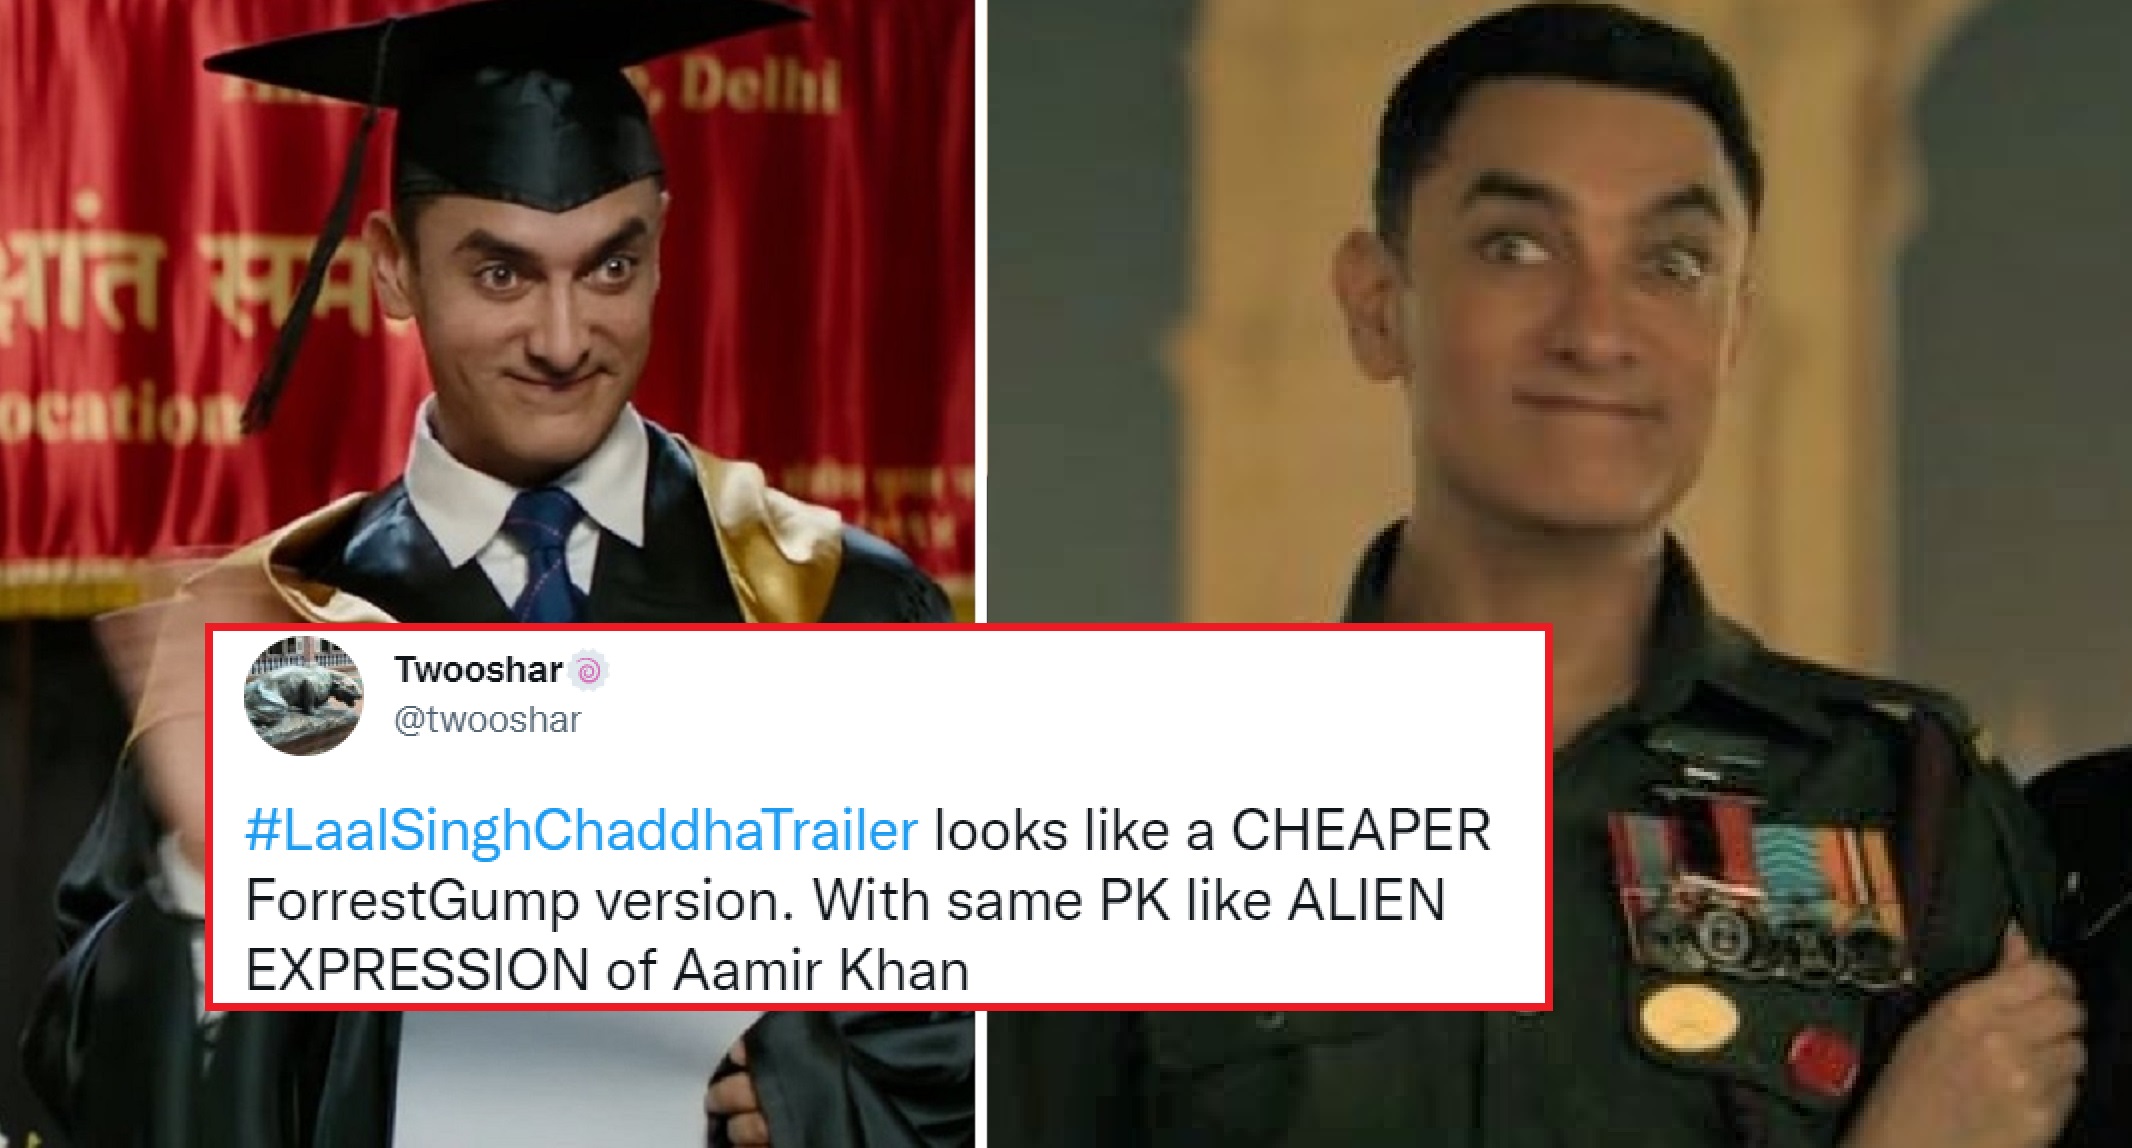 Laal Singh Chaddha Trailer TROLLED: People Say They’re Tired Of Same Expression From Aamir, Here Are The Reactions…